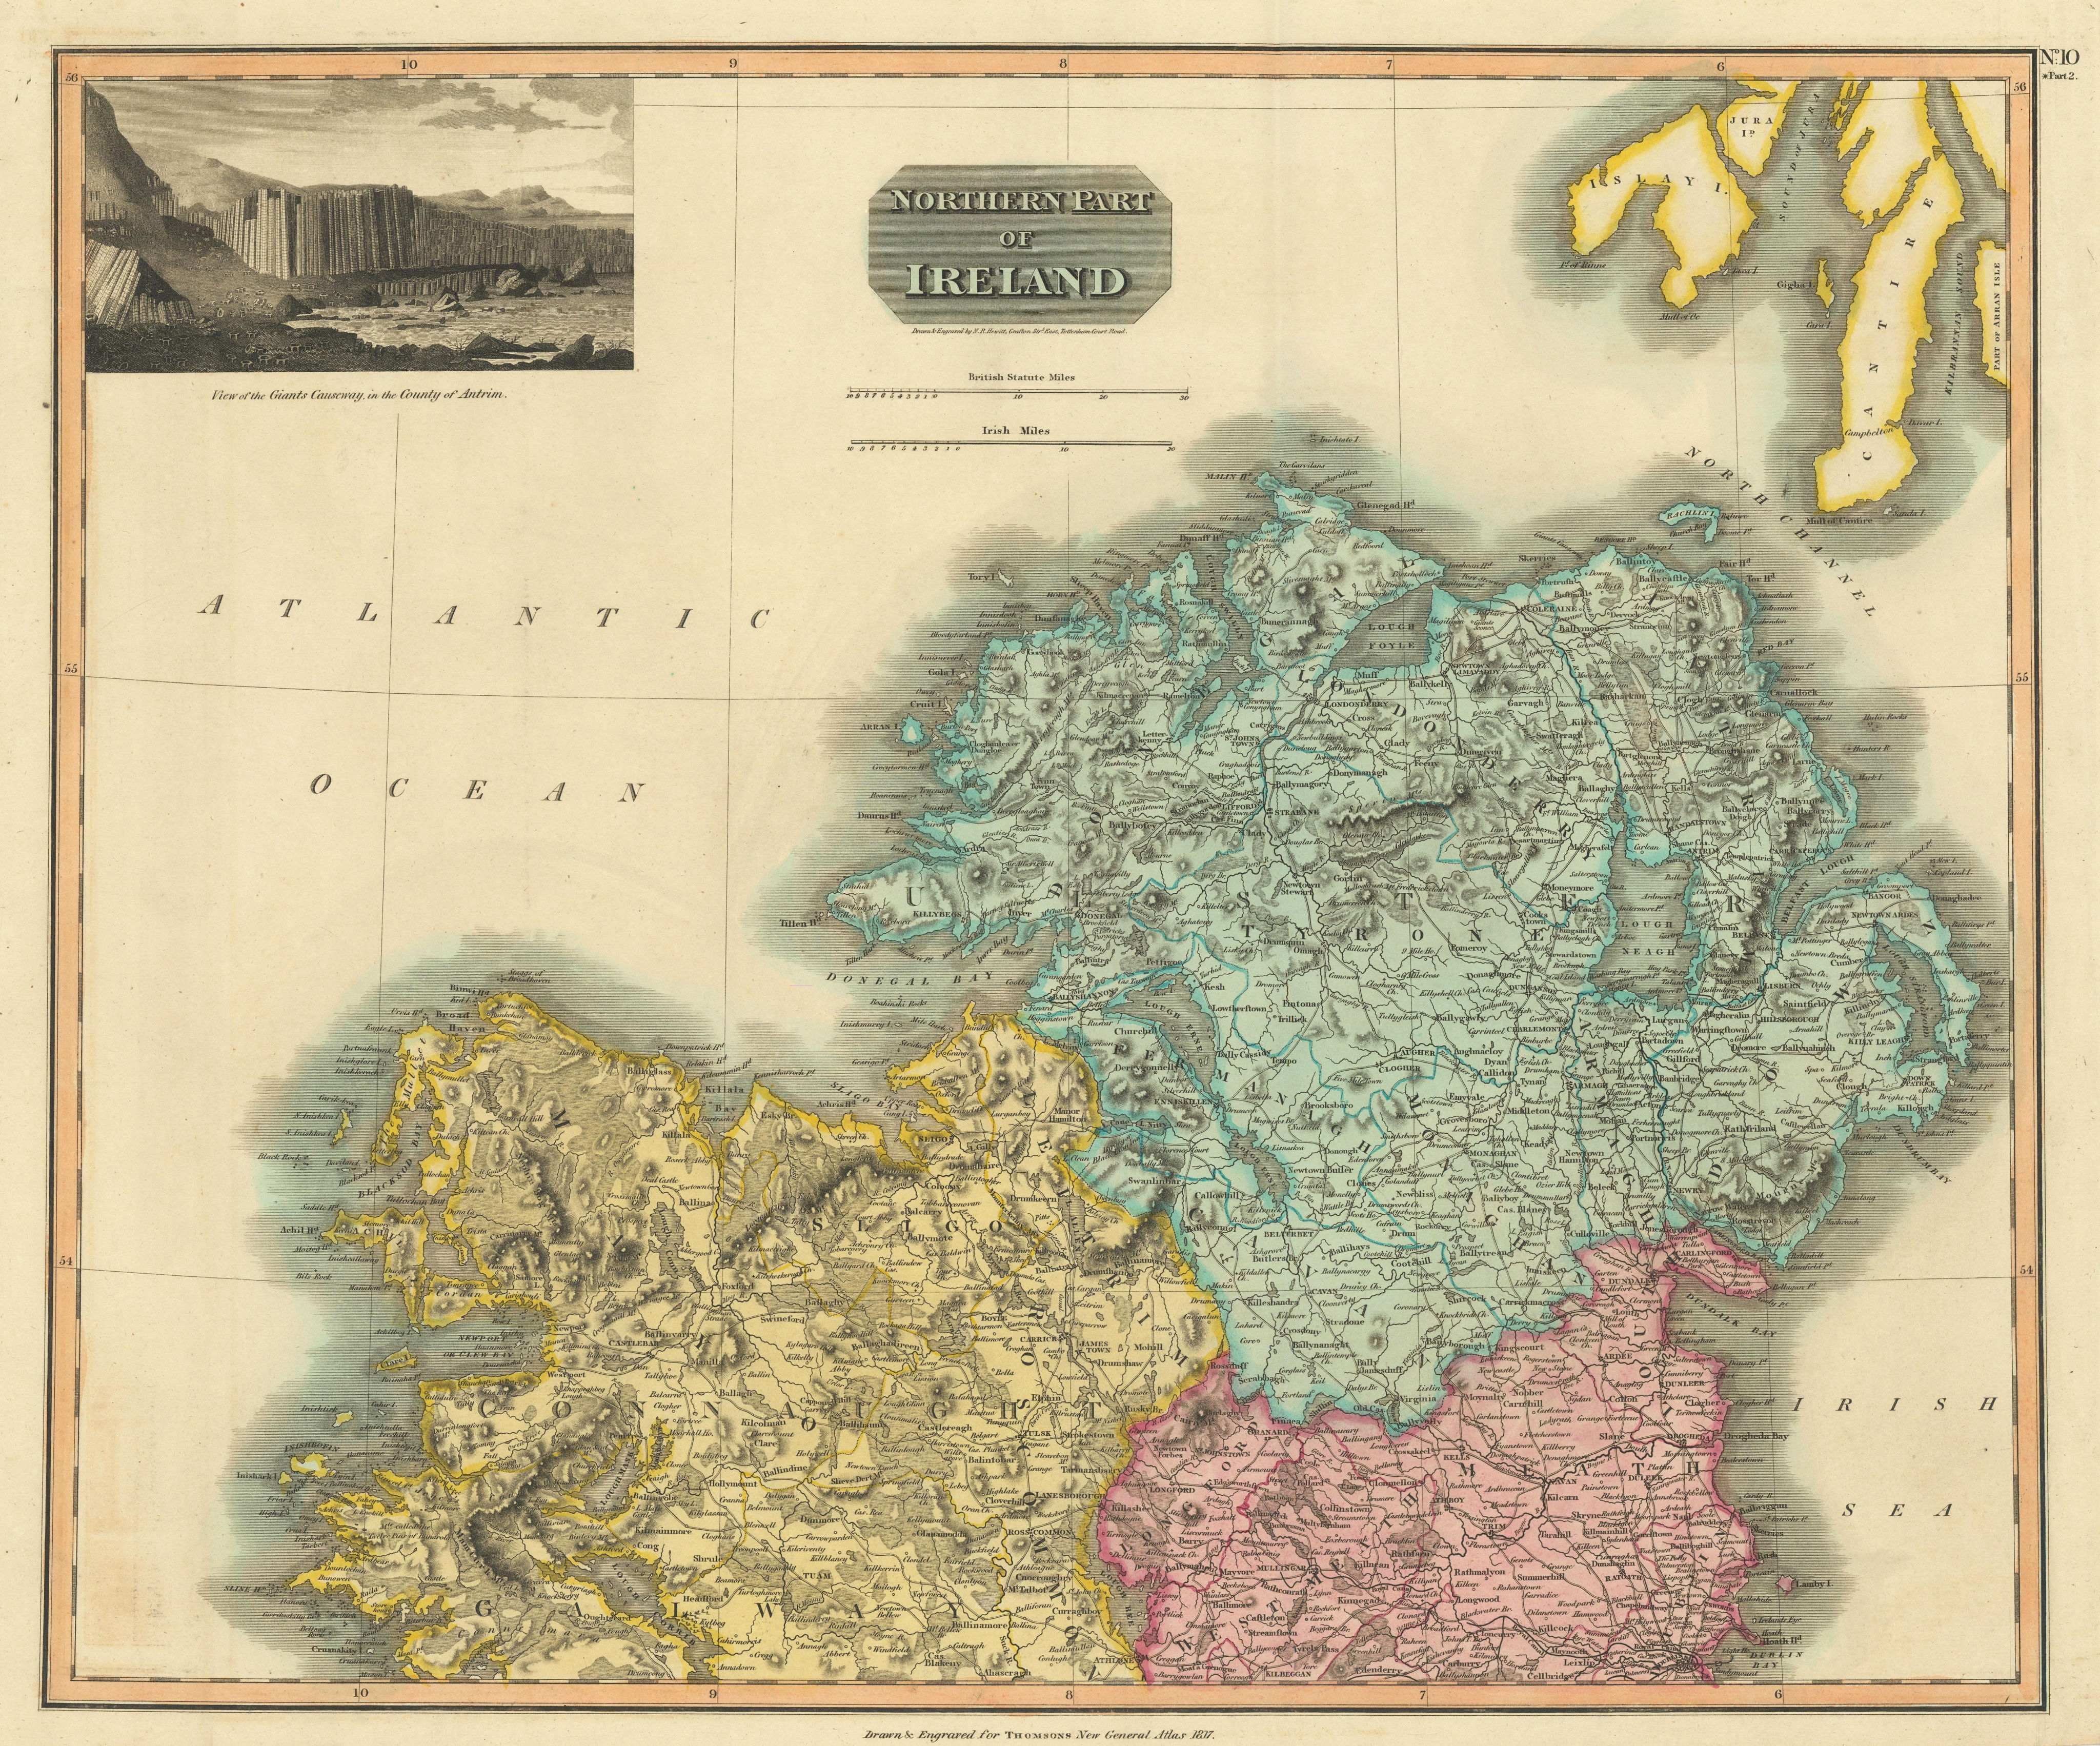 Associate Product Northern part of Ireland. Ulster south to Dublin. Coach roads. THOMSON 1817 map